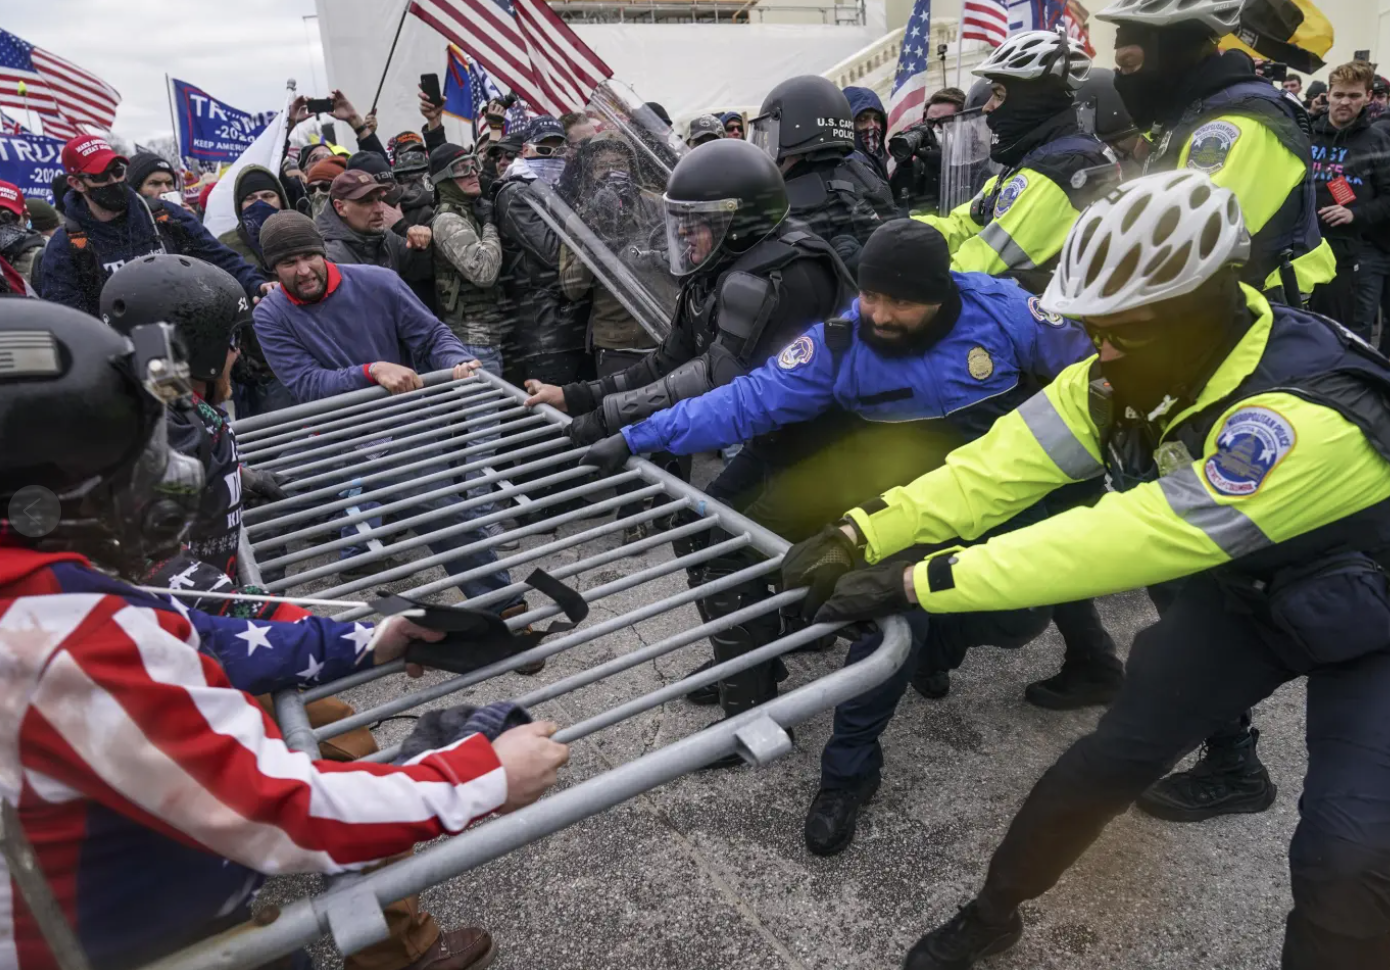 People fight over a barrier.